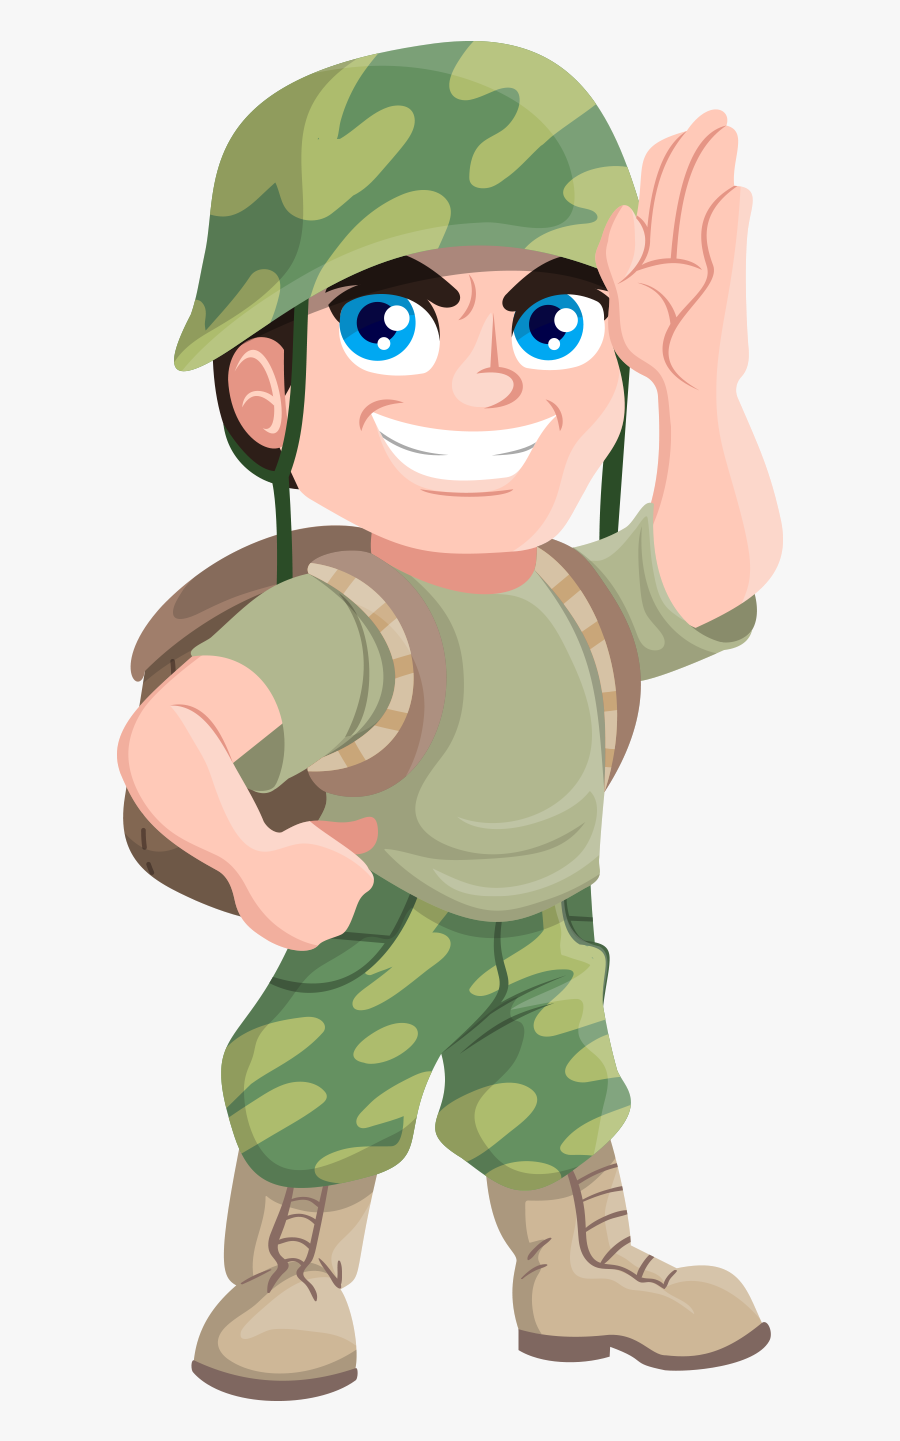 Soldier Free To Use Cliparts - Cartoon Soldier Clip Art, Transparent Clipart